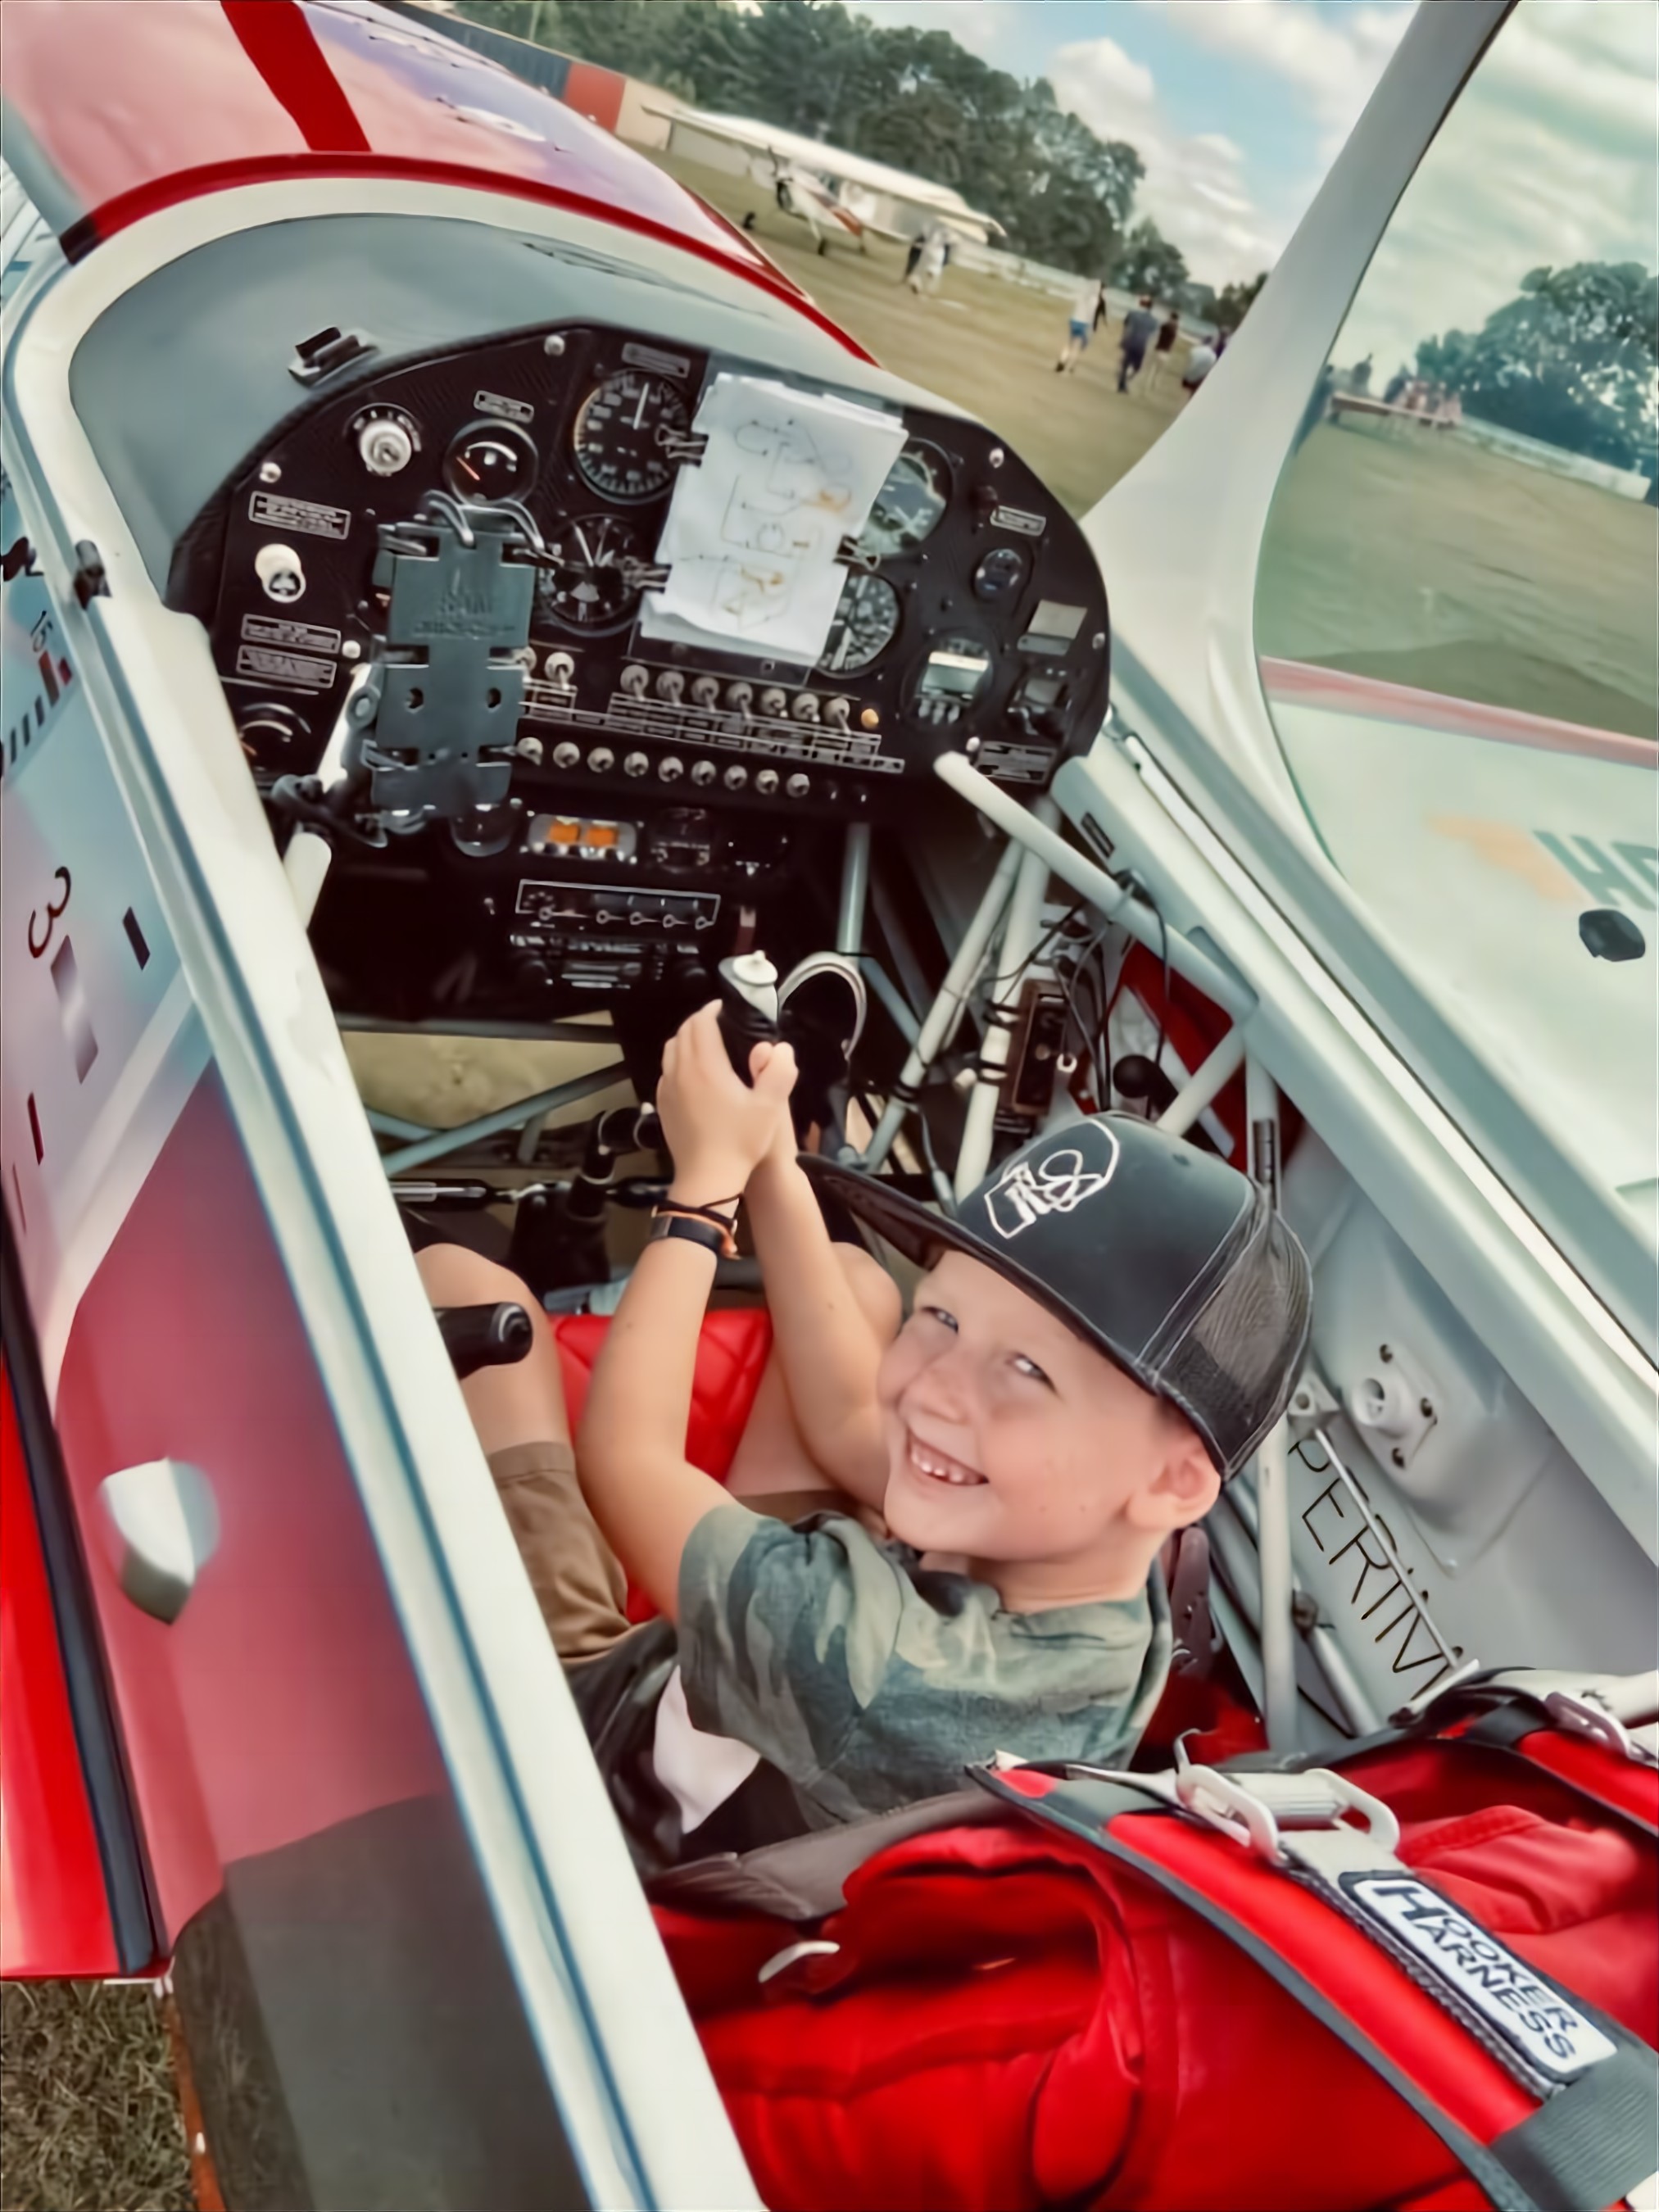 A future pilot -- and perhaps, a future aerobatic competitor -- gets an up-close look at an aerobatic aircraft cockpit during a 2021 aerobatics day event in Willaimson, Georgia. (IAC photo)